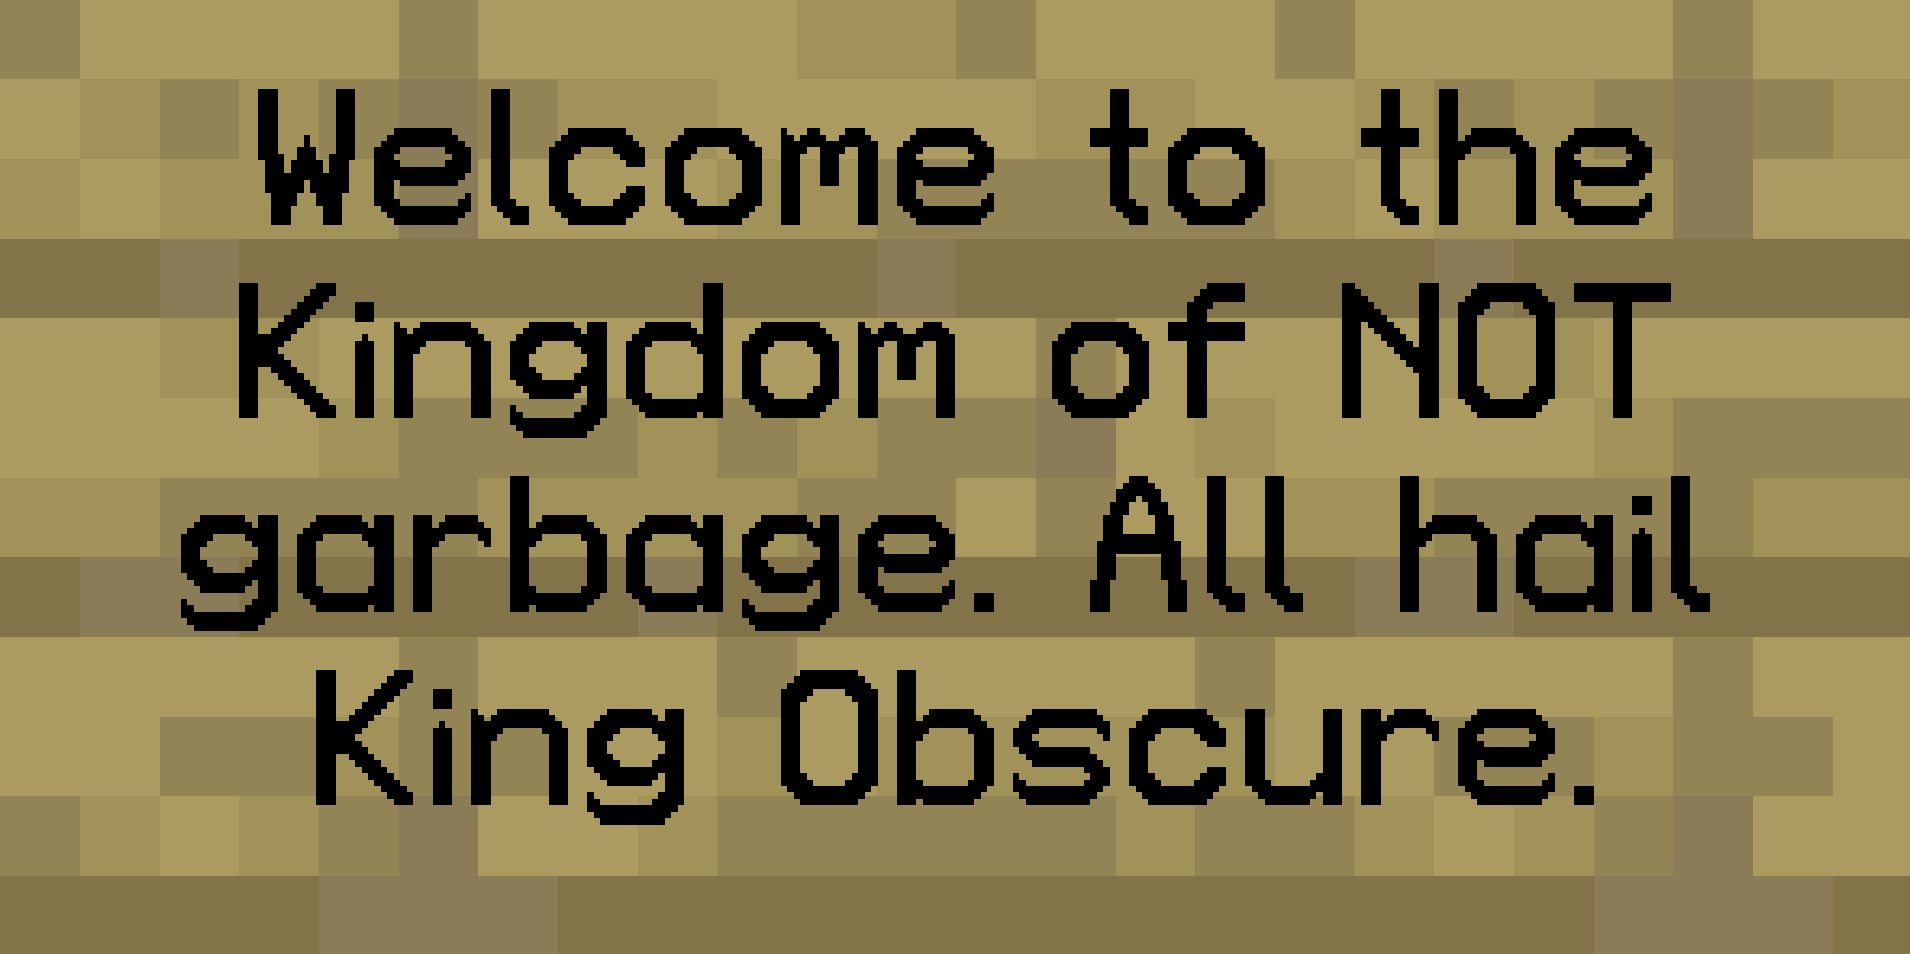 Welcome to the Kingdom of NOT garbage. All hail King Obscure.